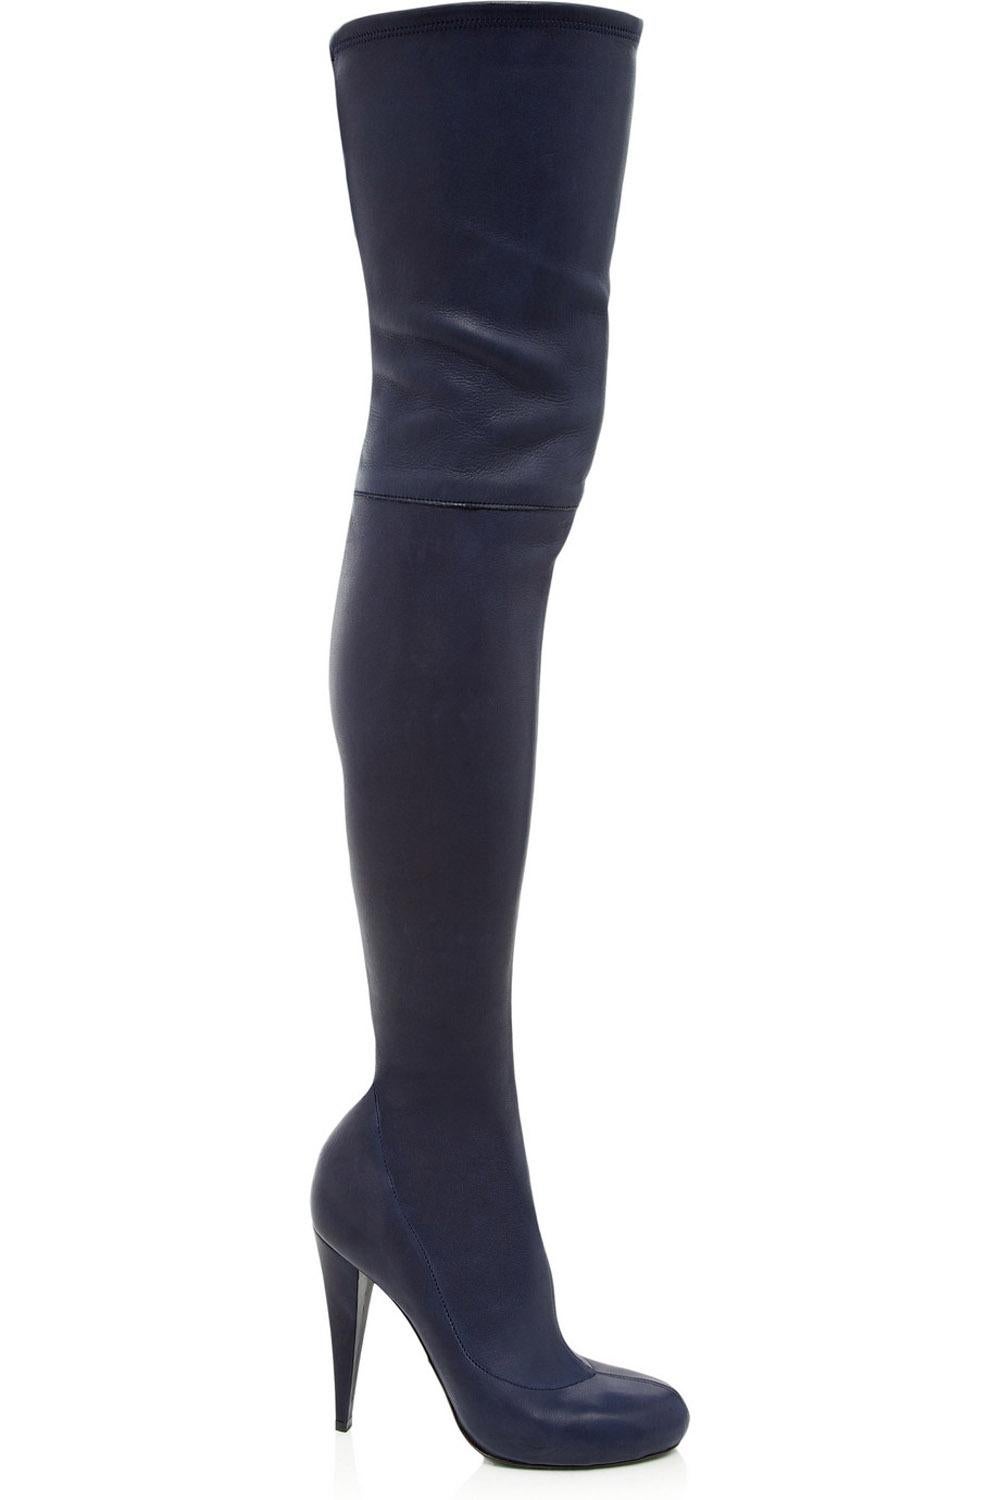 New Roberto Cavalli Blue Stretch Soft Leather Thigh High Heel Boots It ...